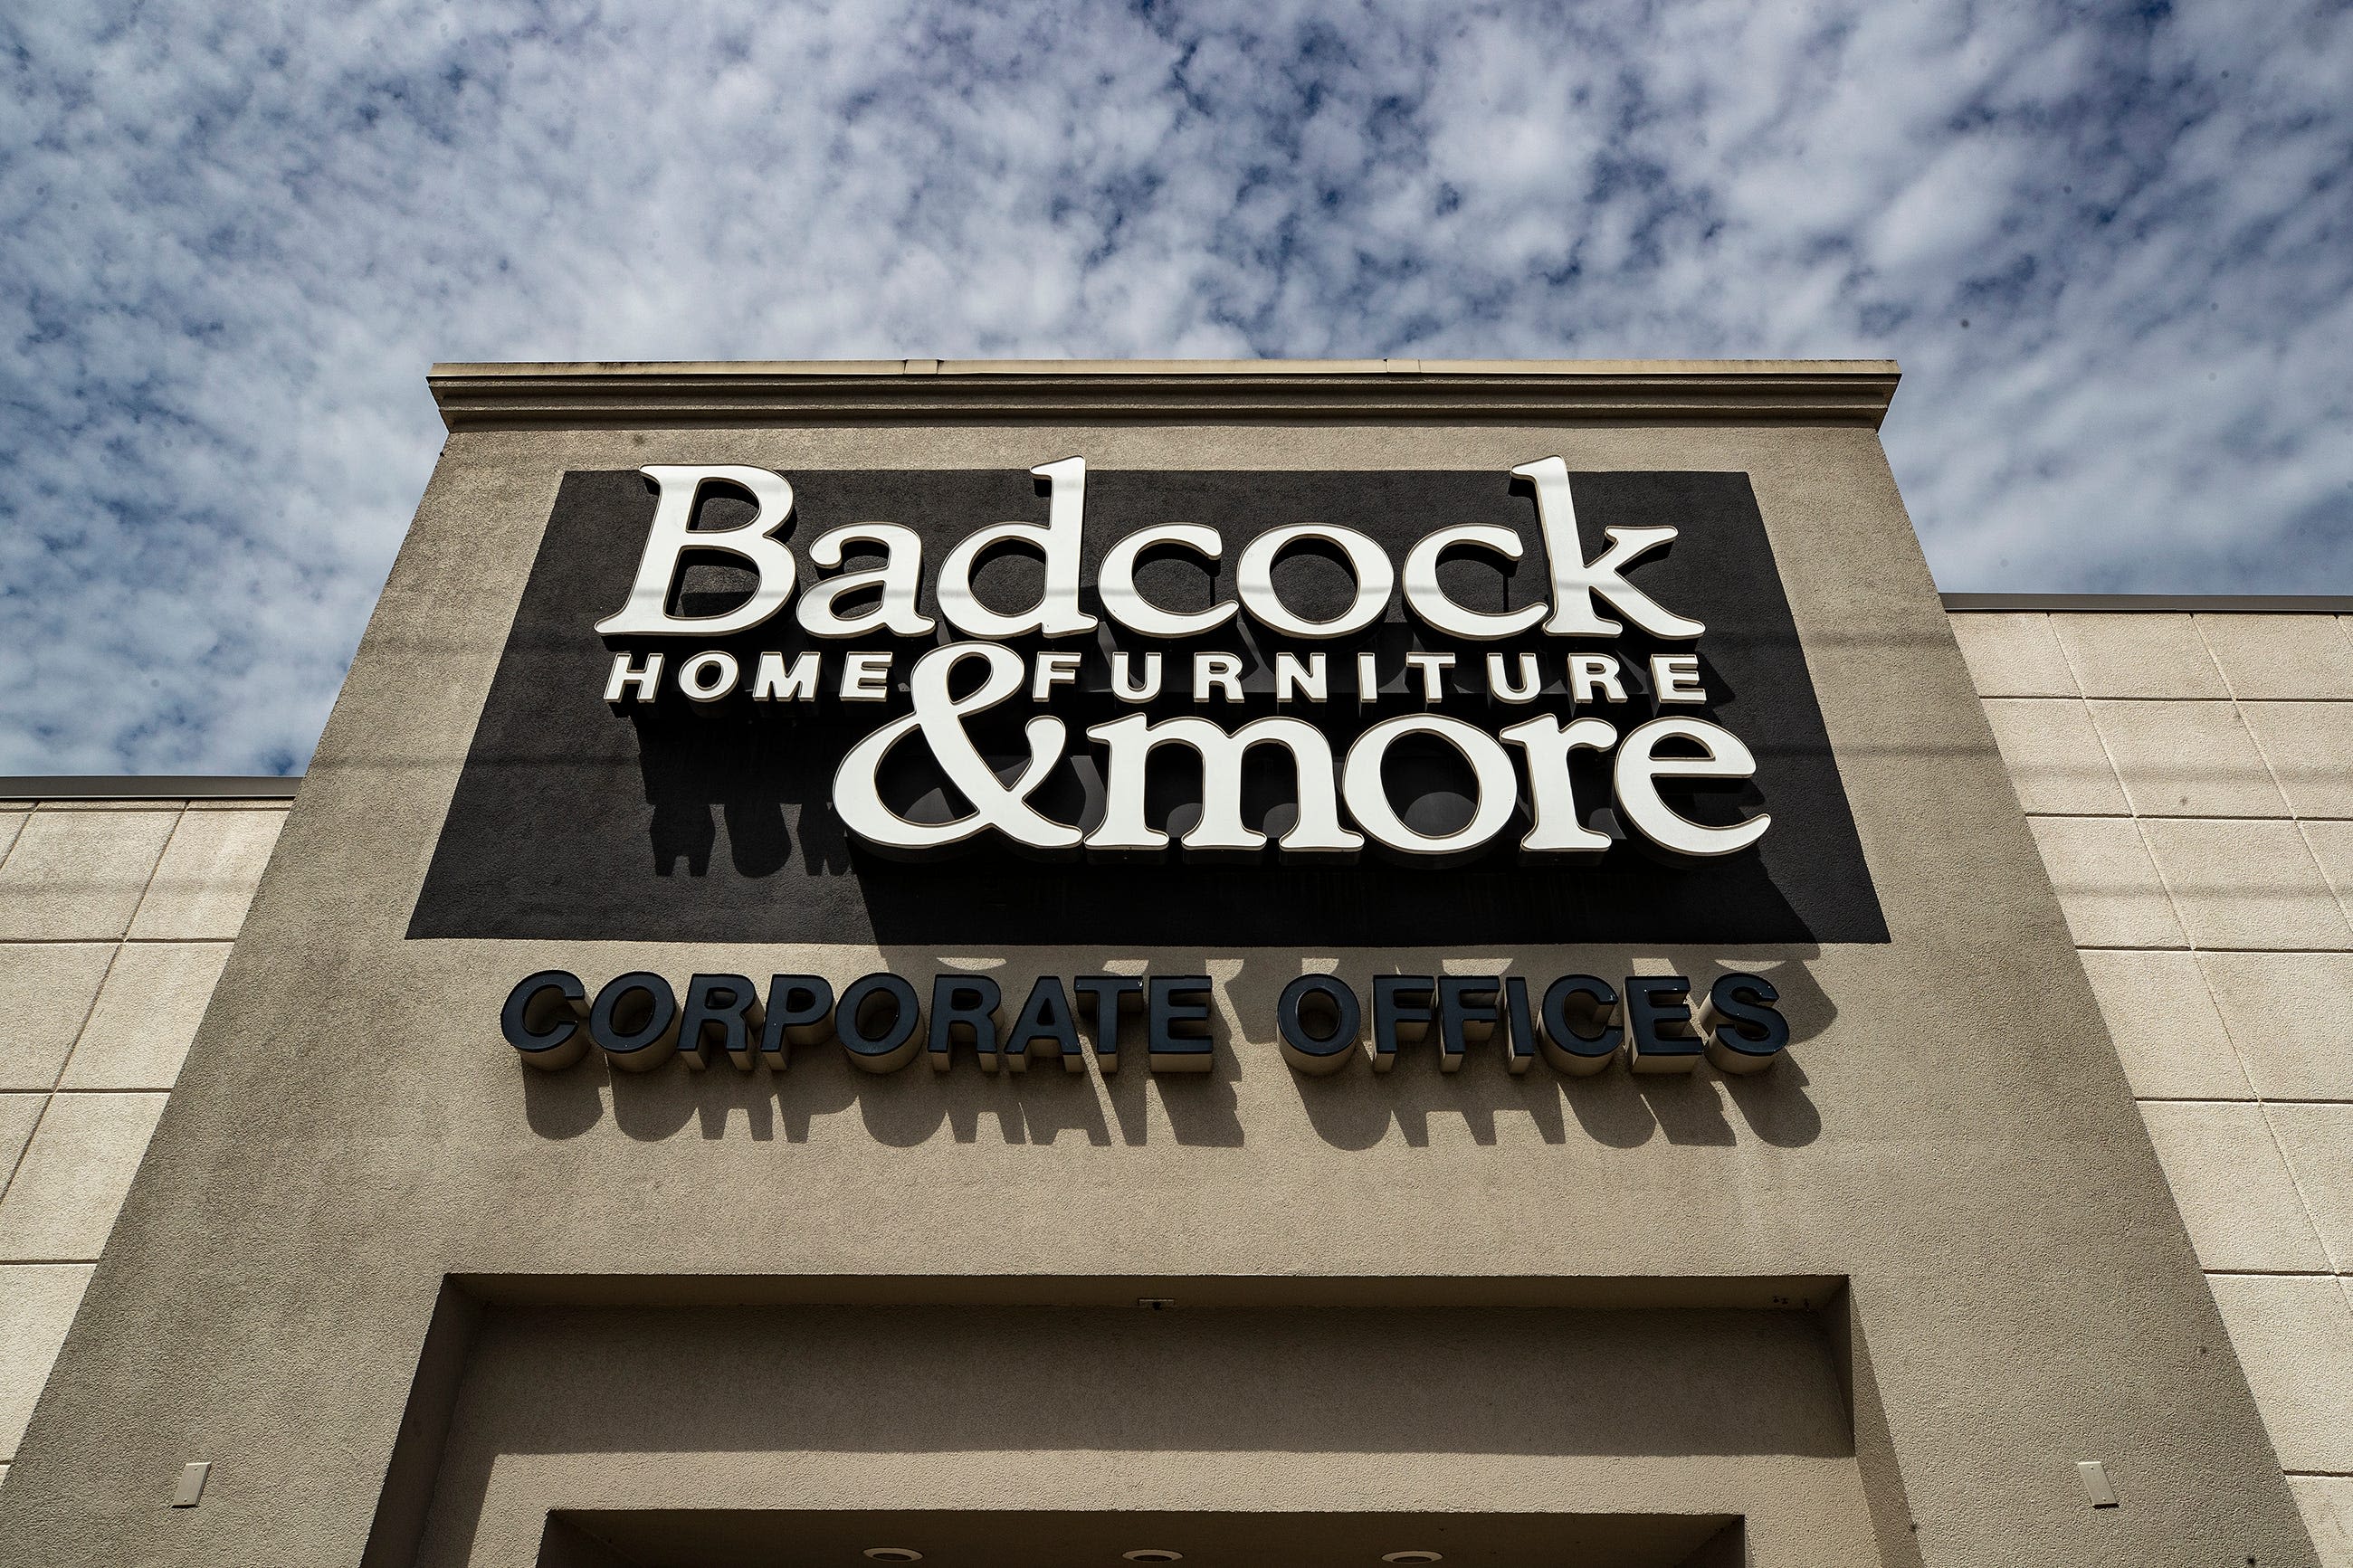 Badcock furniture, rooted in Mulberry, will close all stores. Conn's files for bankruptcy